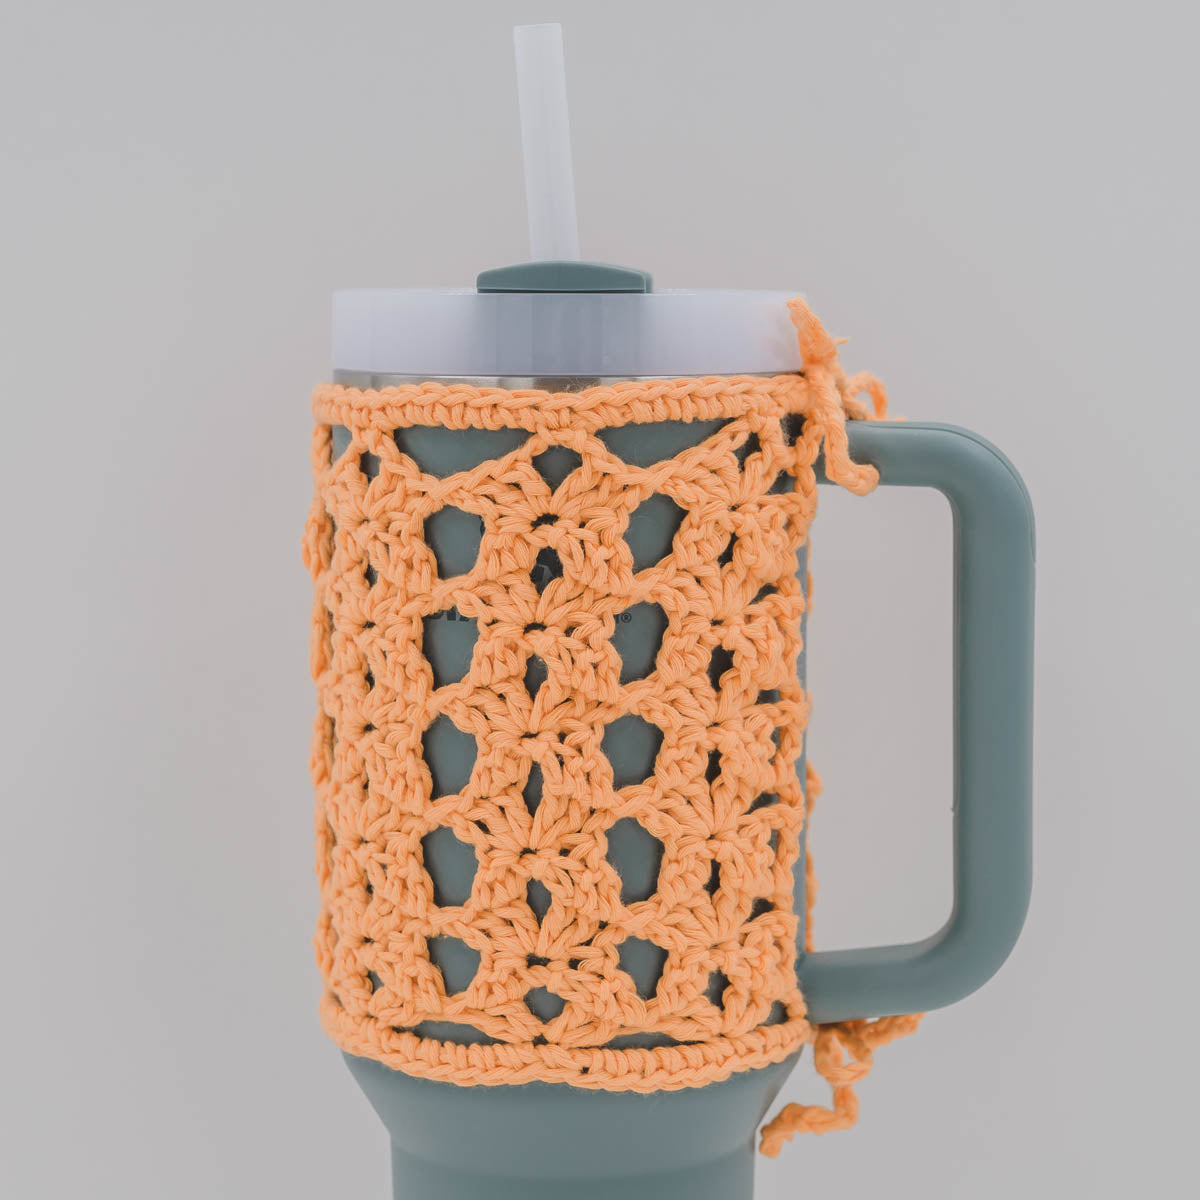 Lace Crochet Stanley Cup Holder Pattern